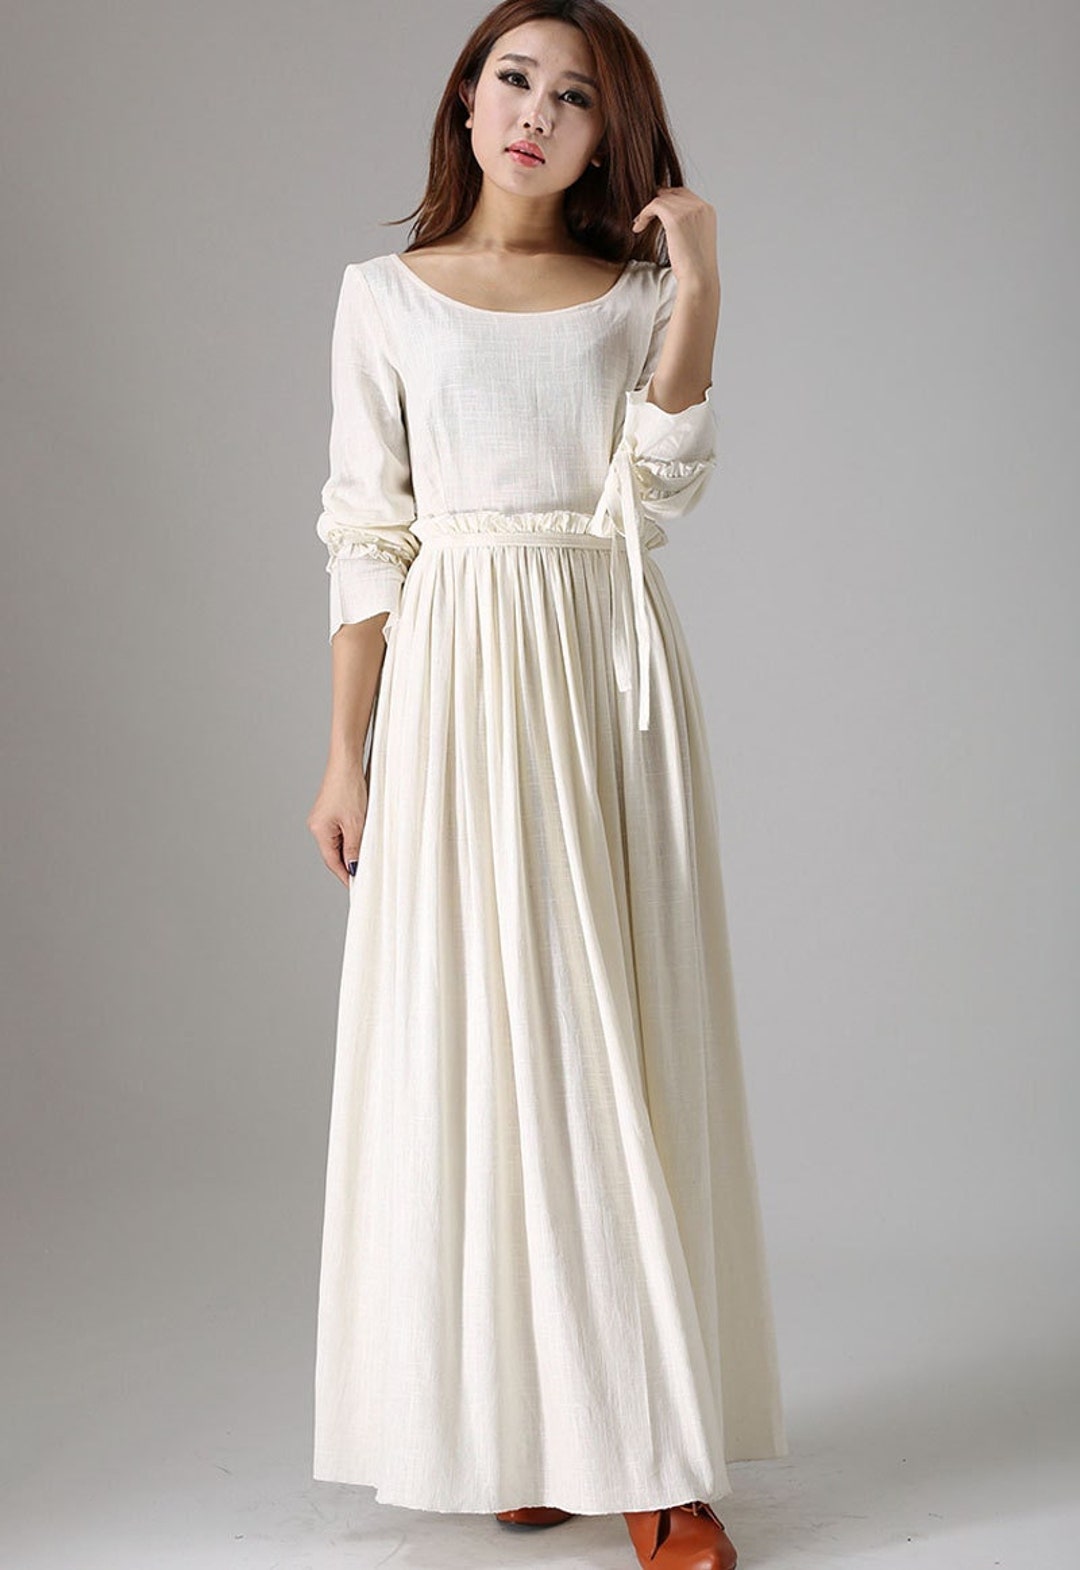 Linen Dress White, off White Dress, Maxi Dress for Women, Fit and Flare ...